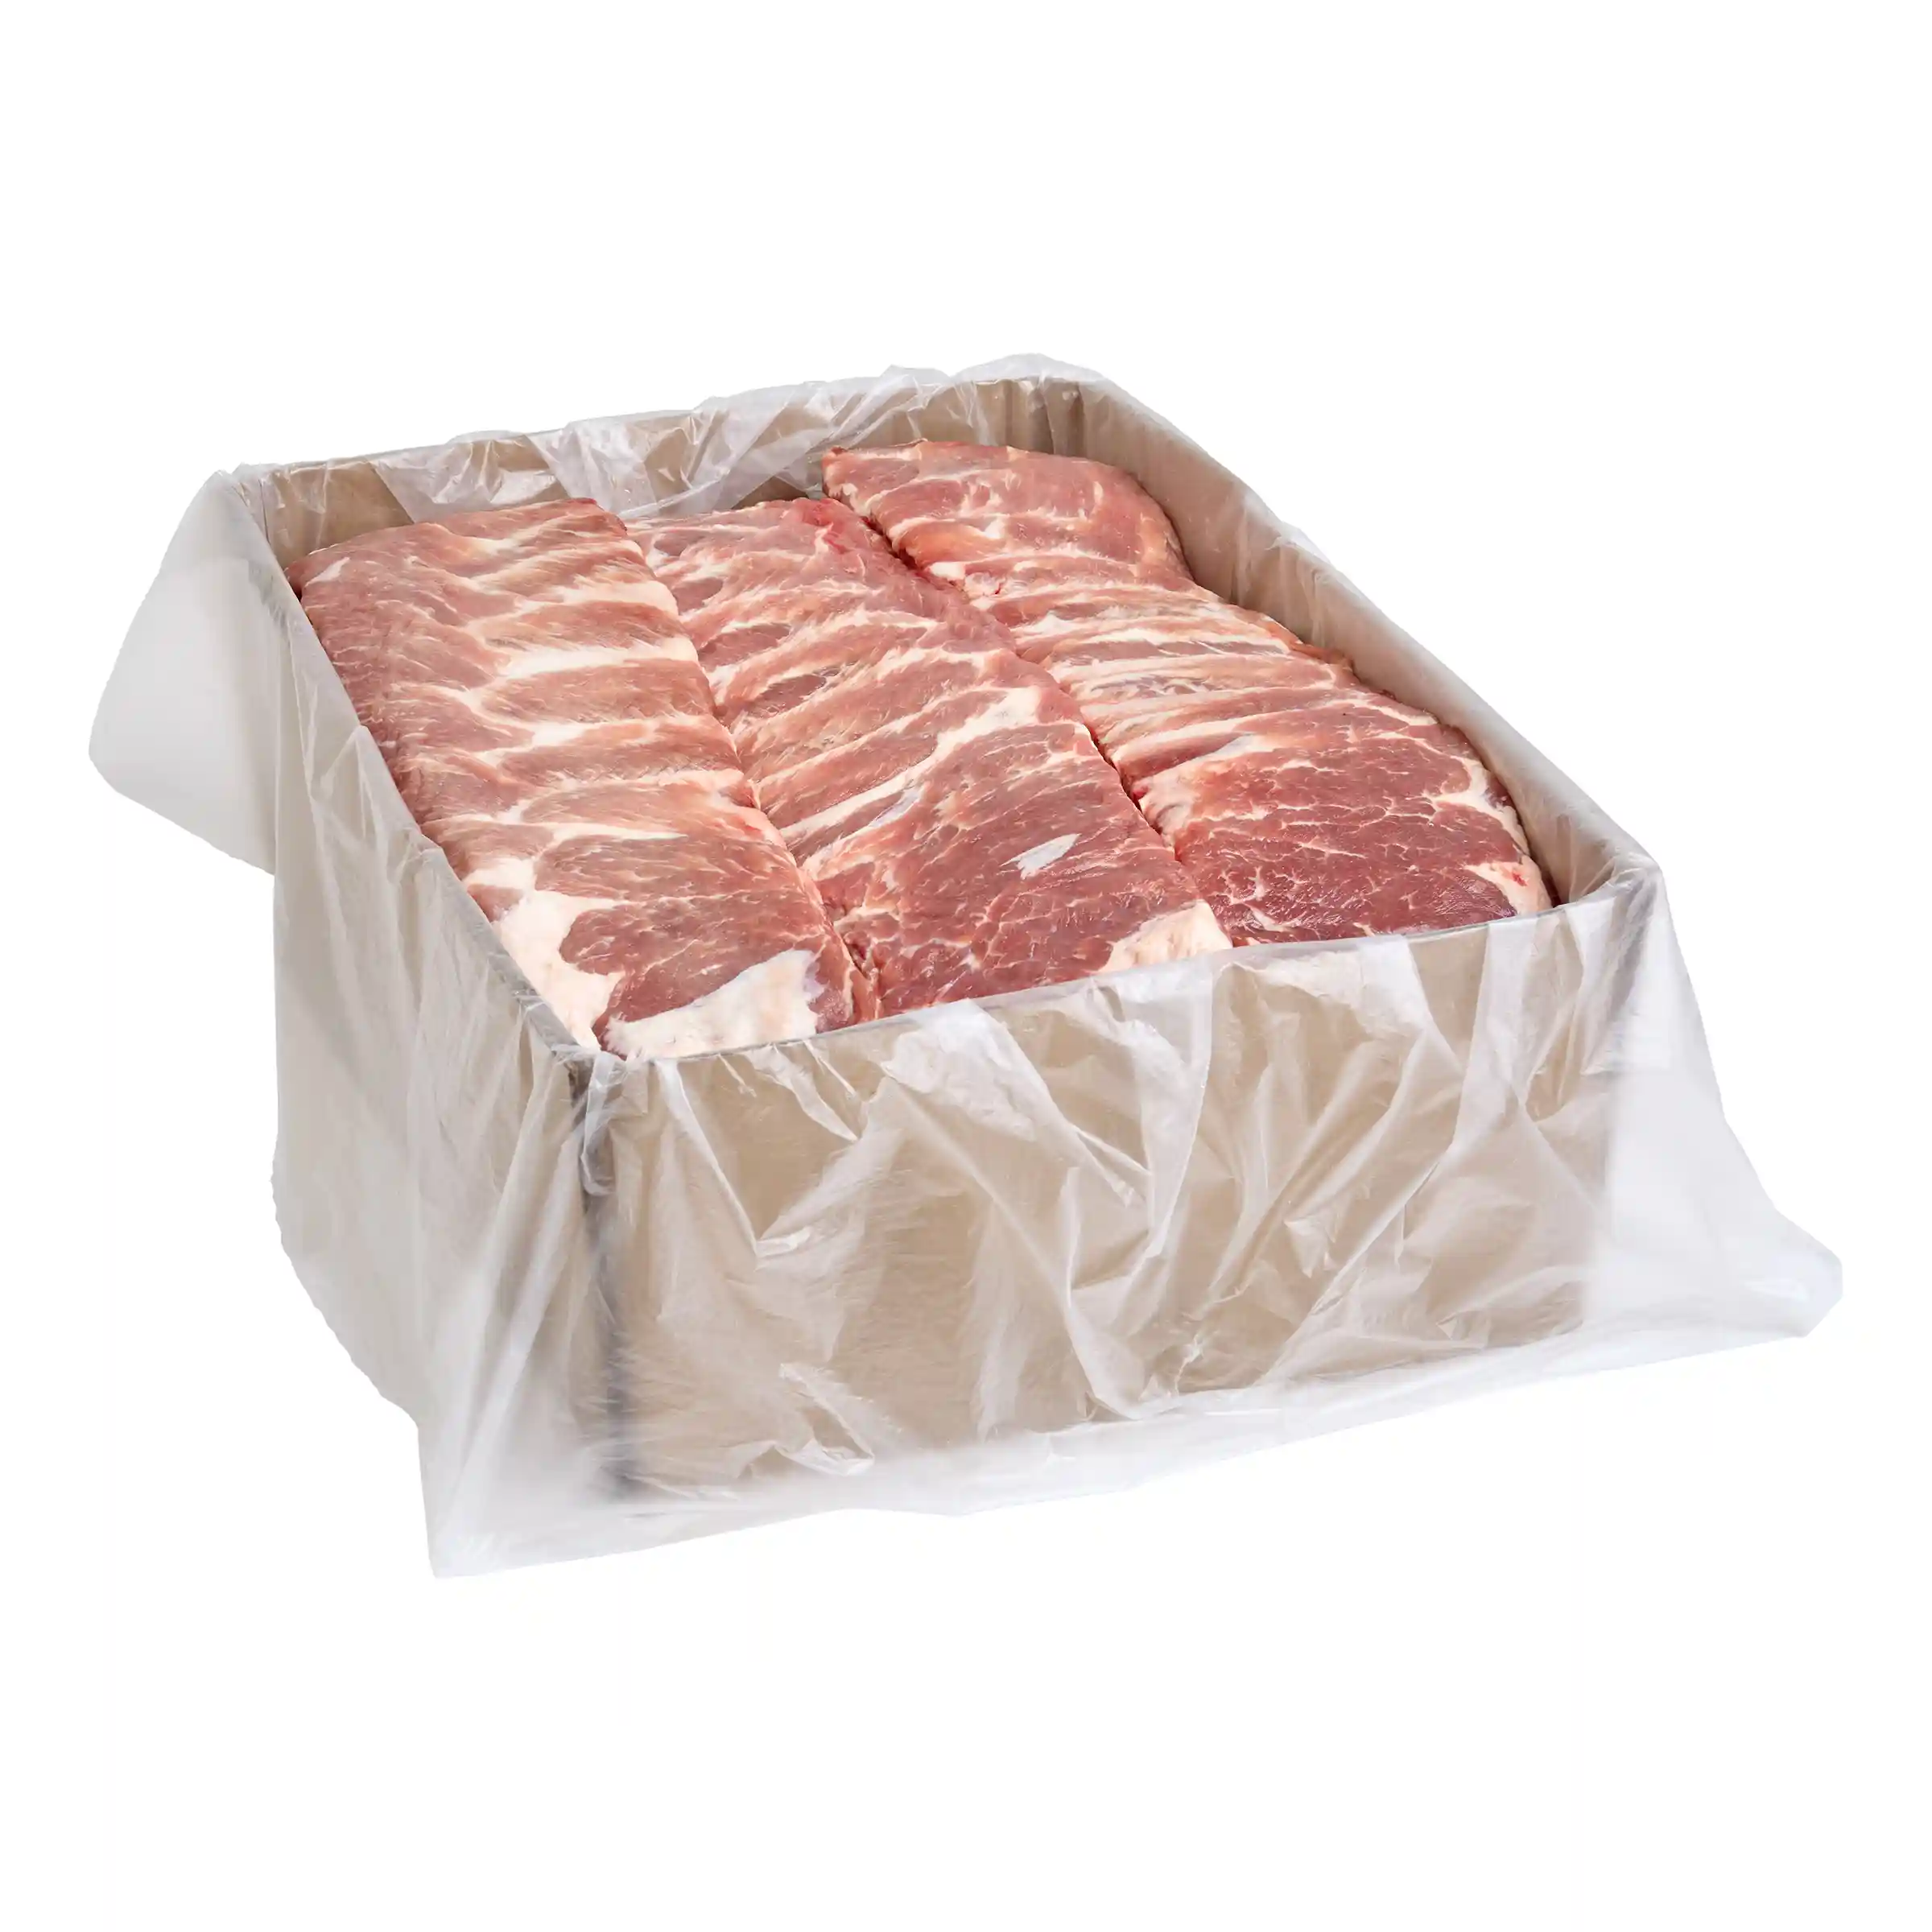 ibp Trusted Excellence® Brand St. Louis Style Ribs, 2.26 – 2.5 lbs_image_31